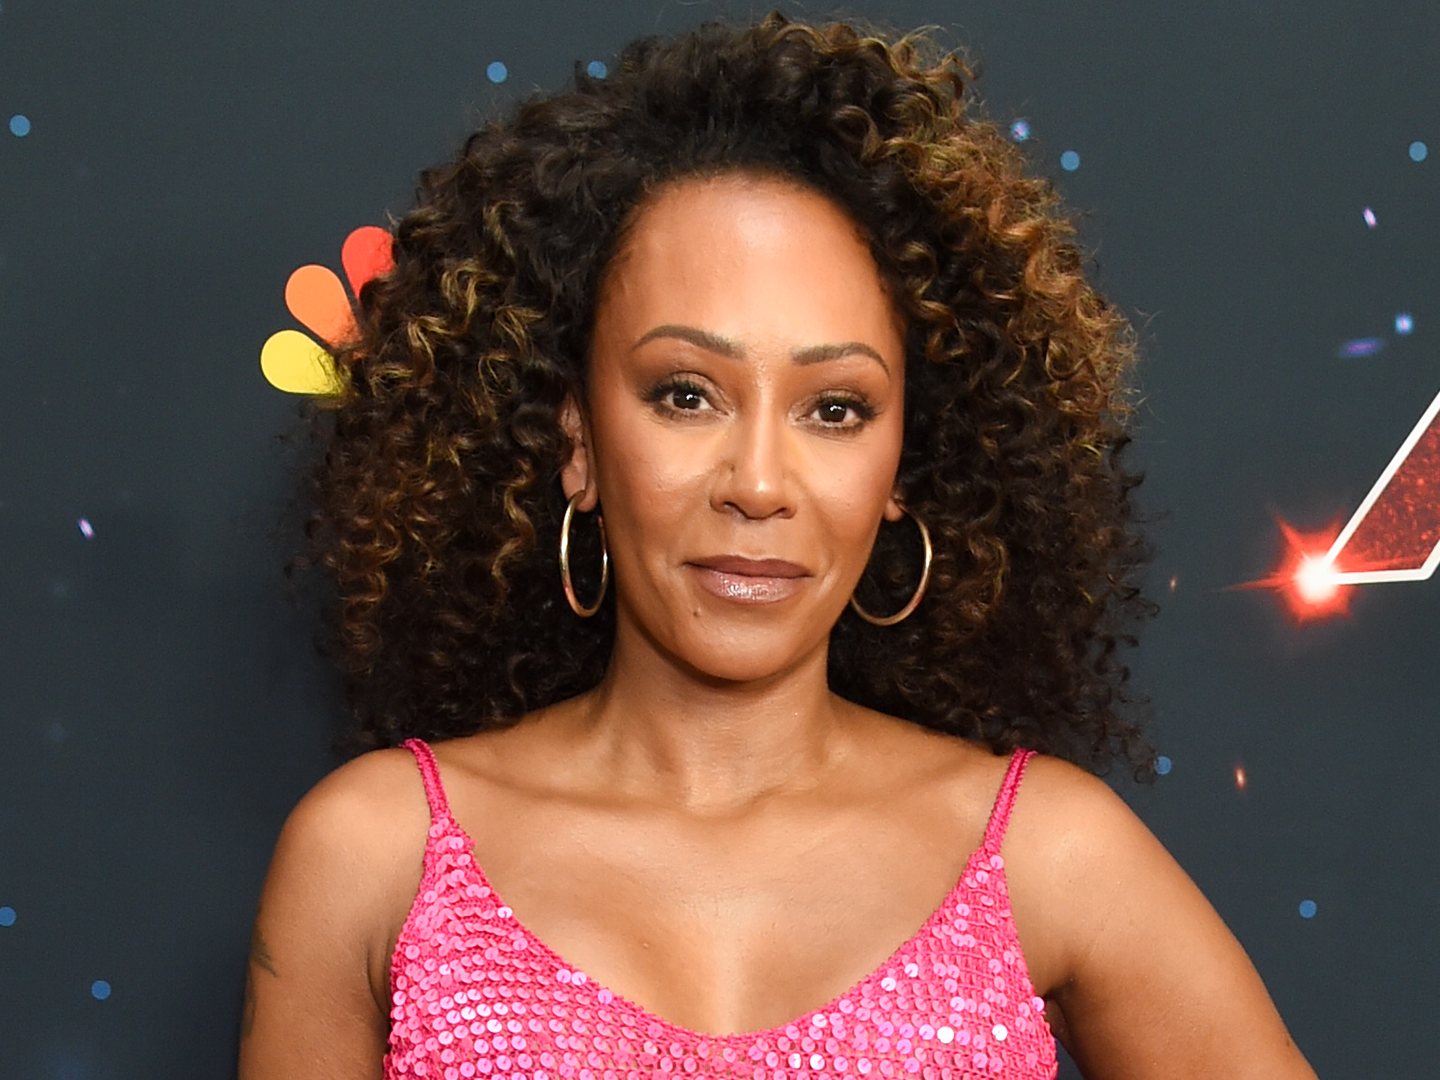 Mel B’s Heartbreaking Experience With Emotional Abuse Shows How Long-Lasting the Effects Can Be